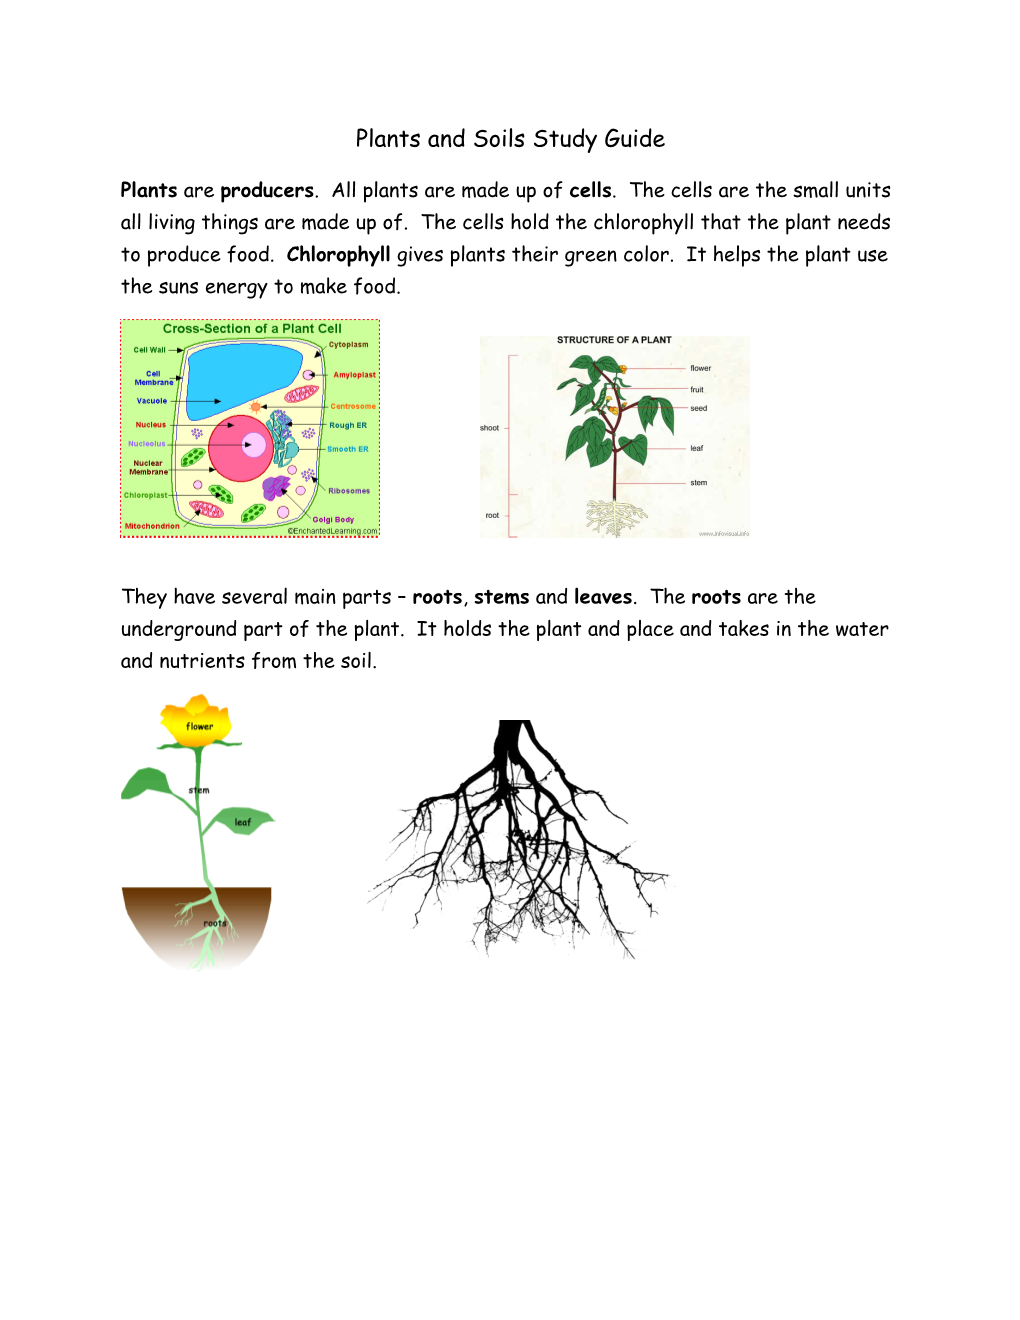 Plants and Soils Study Guide